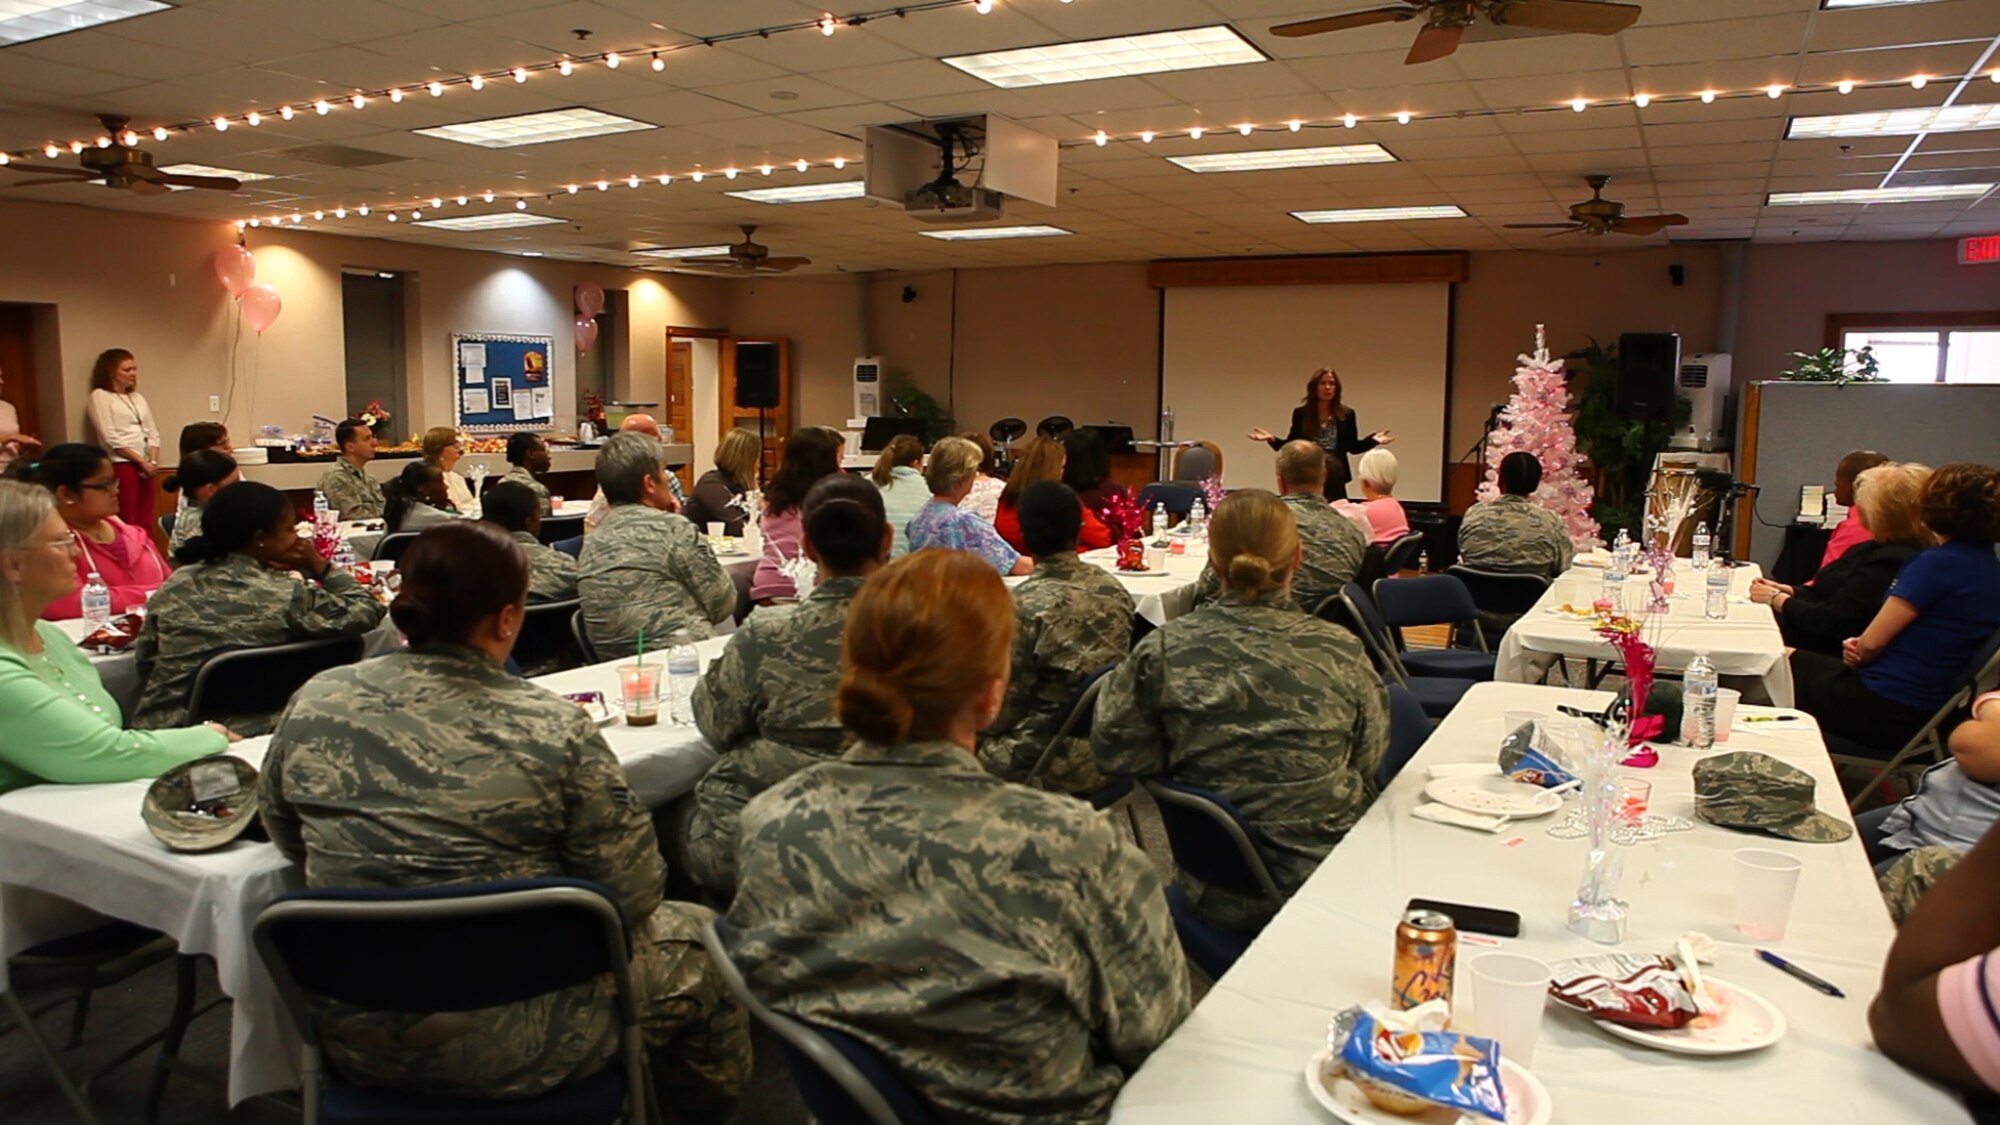 Lauren Miller, a breast cancer survivor and acclaimed author on handling stress, speaks about her experience to an audience at F.E. Warren Air Force Base, Wyo., Oct. 27, 2016. The 90th Medical Group hosted Miller as a guest speaker as one of the events commemorating Breast Cancer Awareness Month. Every year in October, military bases host a multitude of events to bring the issue of breast cancer to the forefront. Addressing the audience, Miller said, "The first step toward recovery is ruthless valiant honesty.” (U.S. Air Force Photo by Lan Kim)